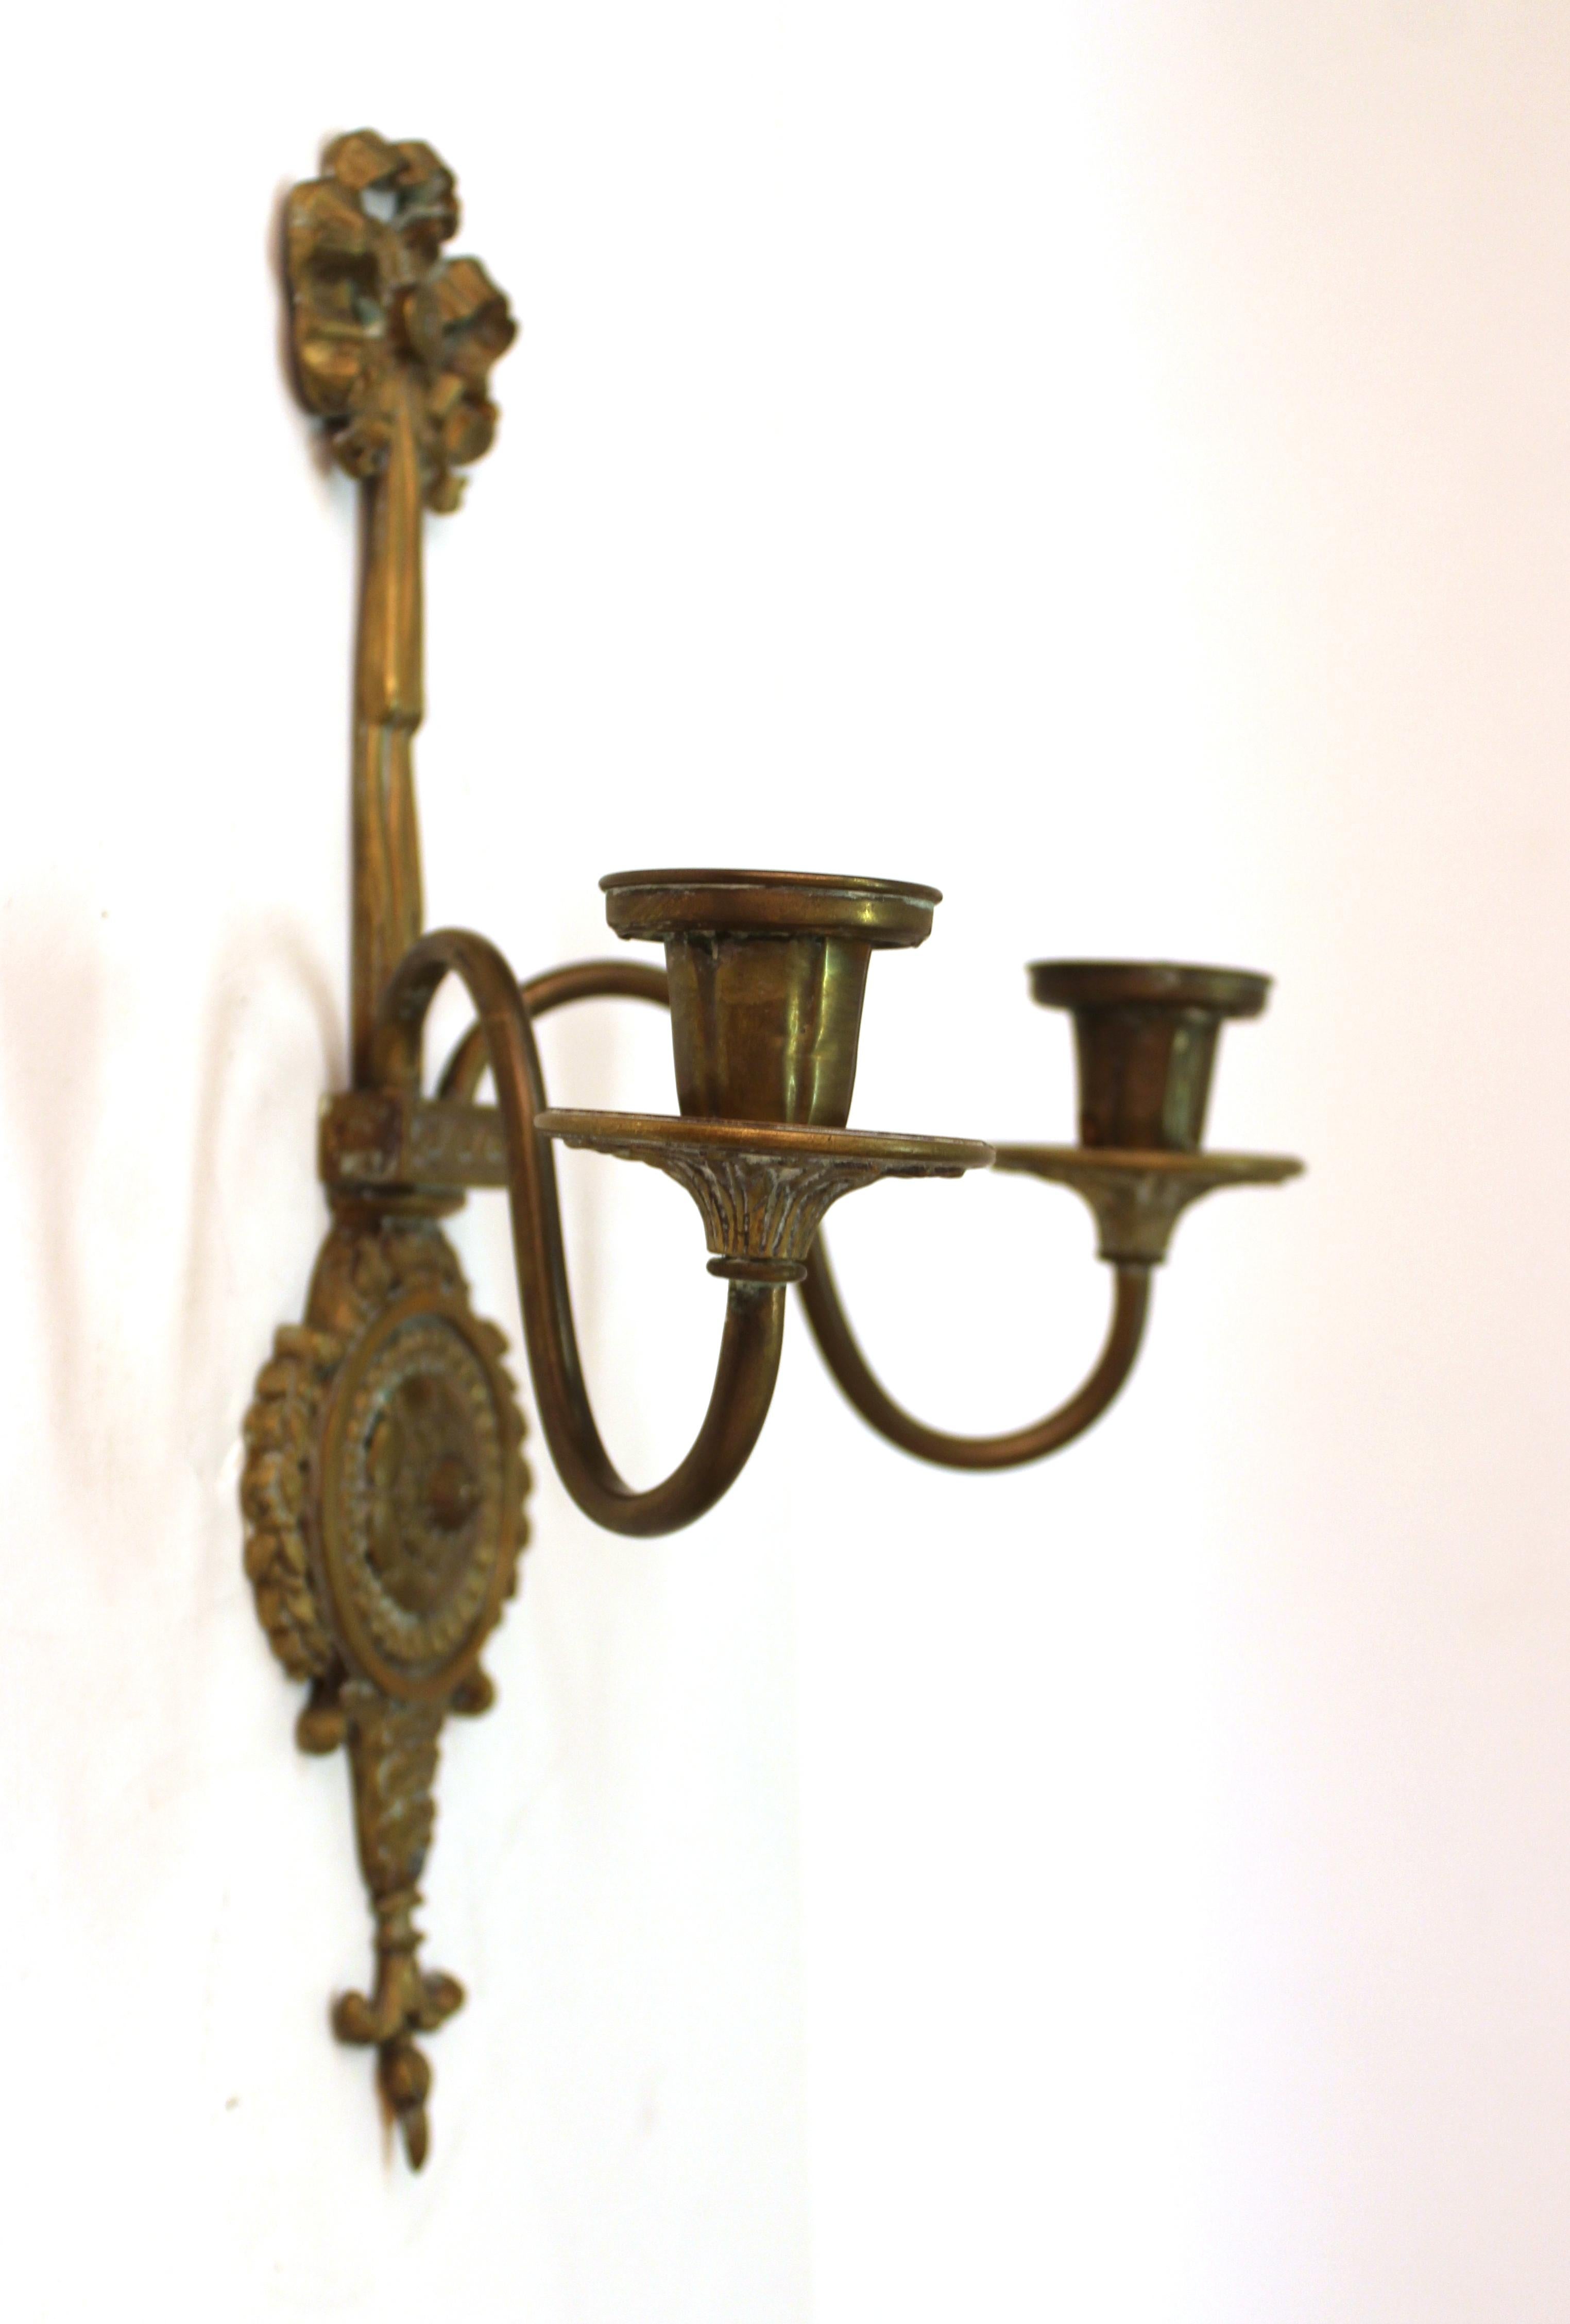 O.C. White Co. Neoclassical Style Gilt Brass Candelabra Sconces For Sale 5